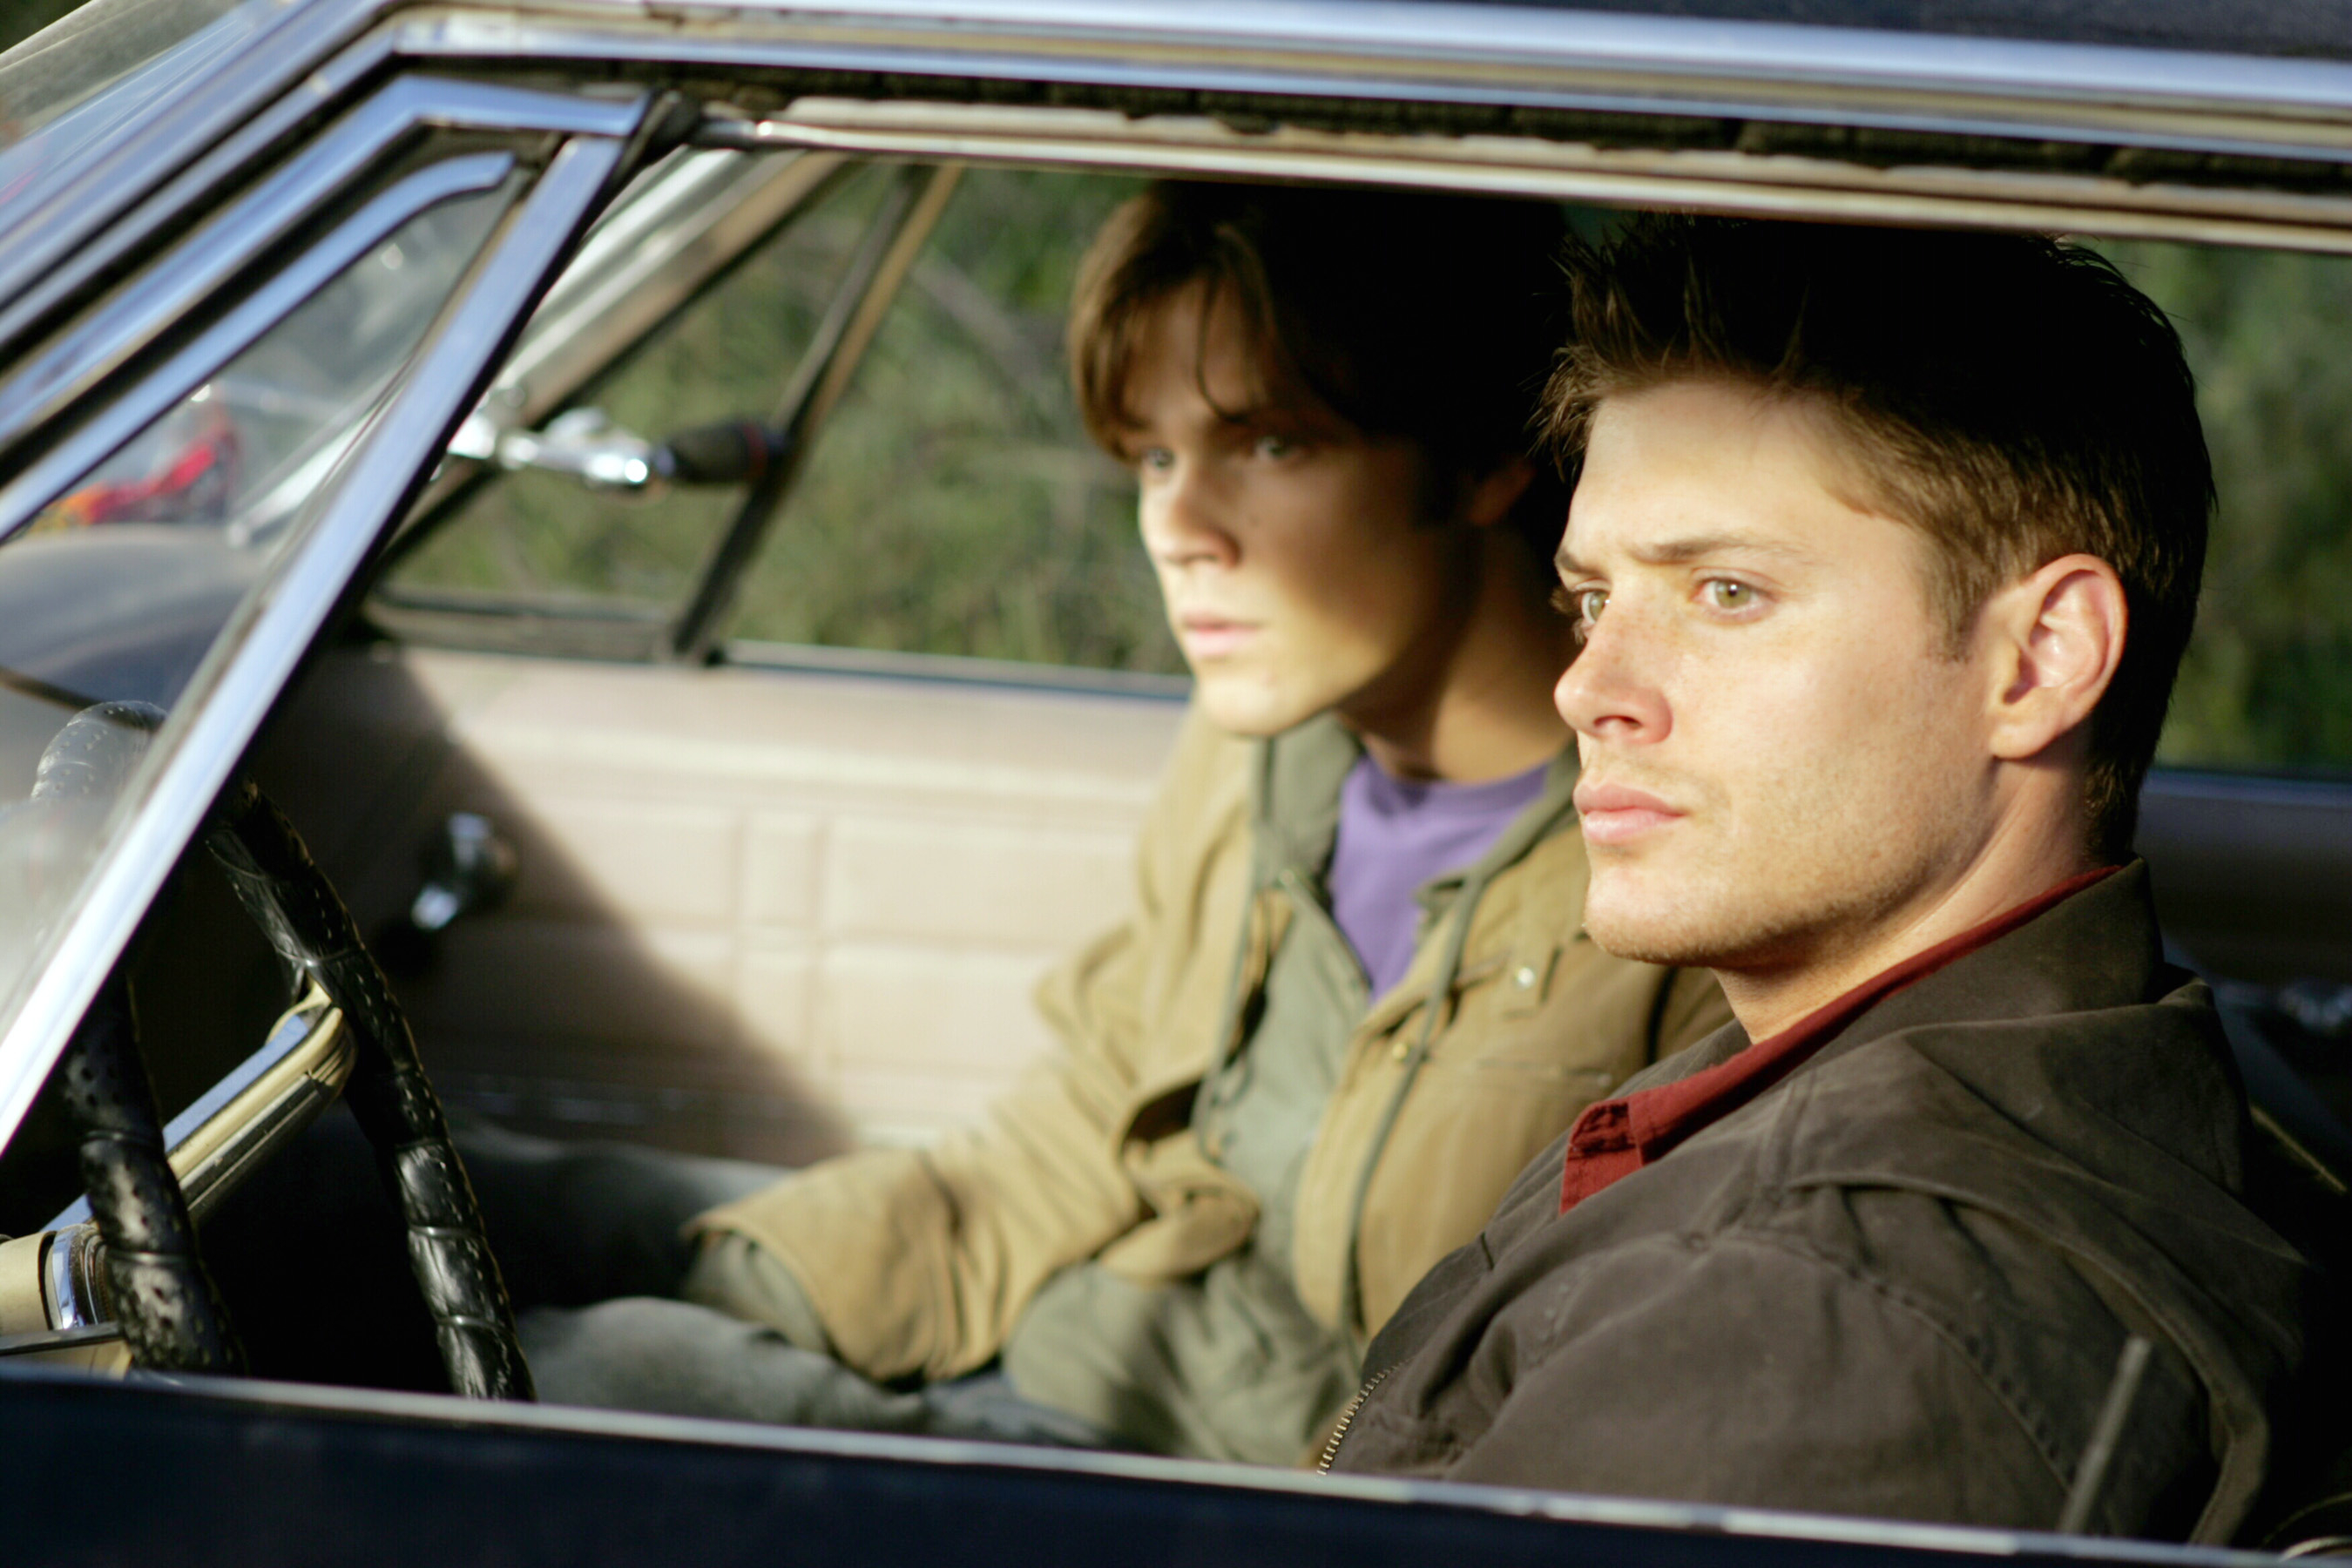 Two actors portraying Sam and Dean Winchester sitting in a car, looking intently in the same direction